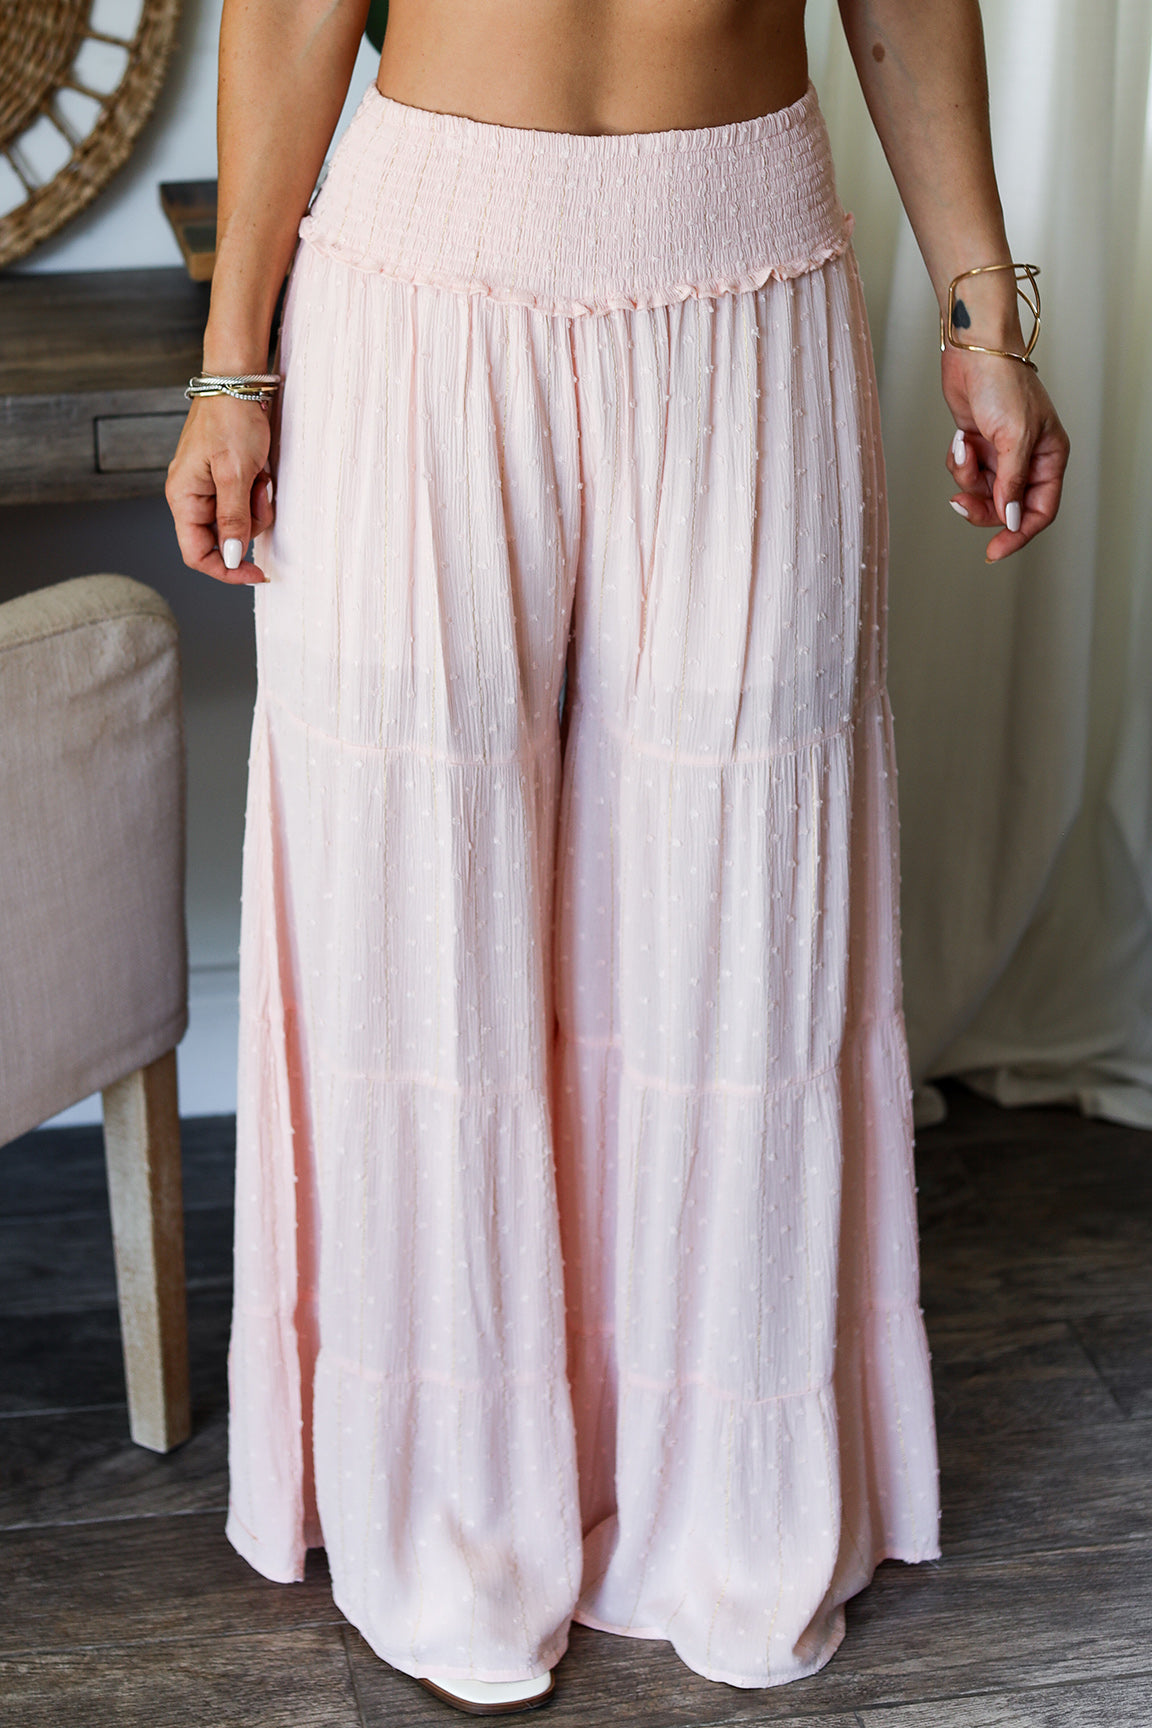 Women Solid Baby Pink Cotton Wide Leg Pants